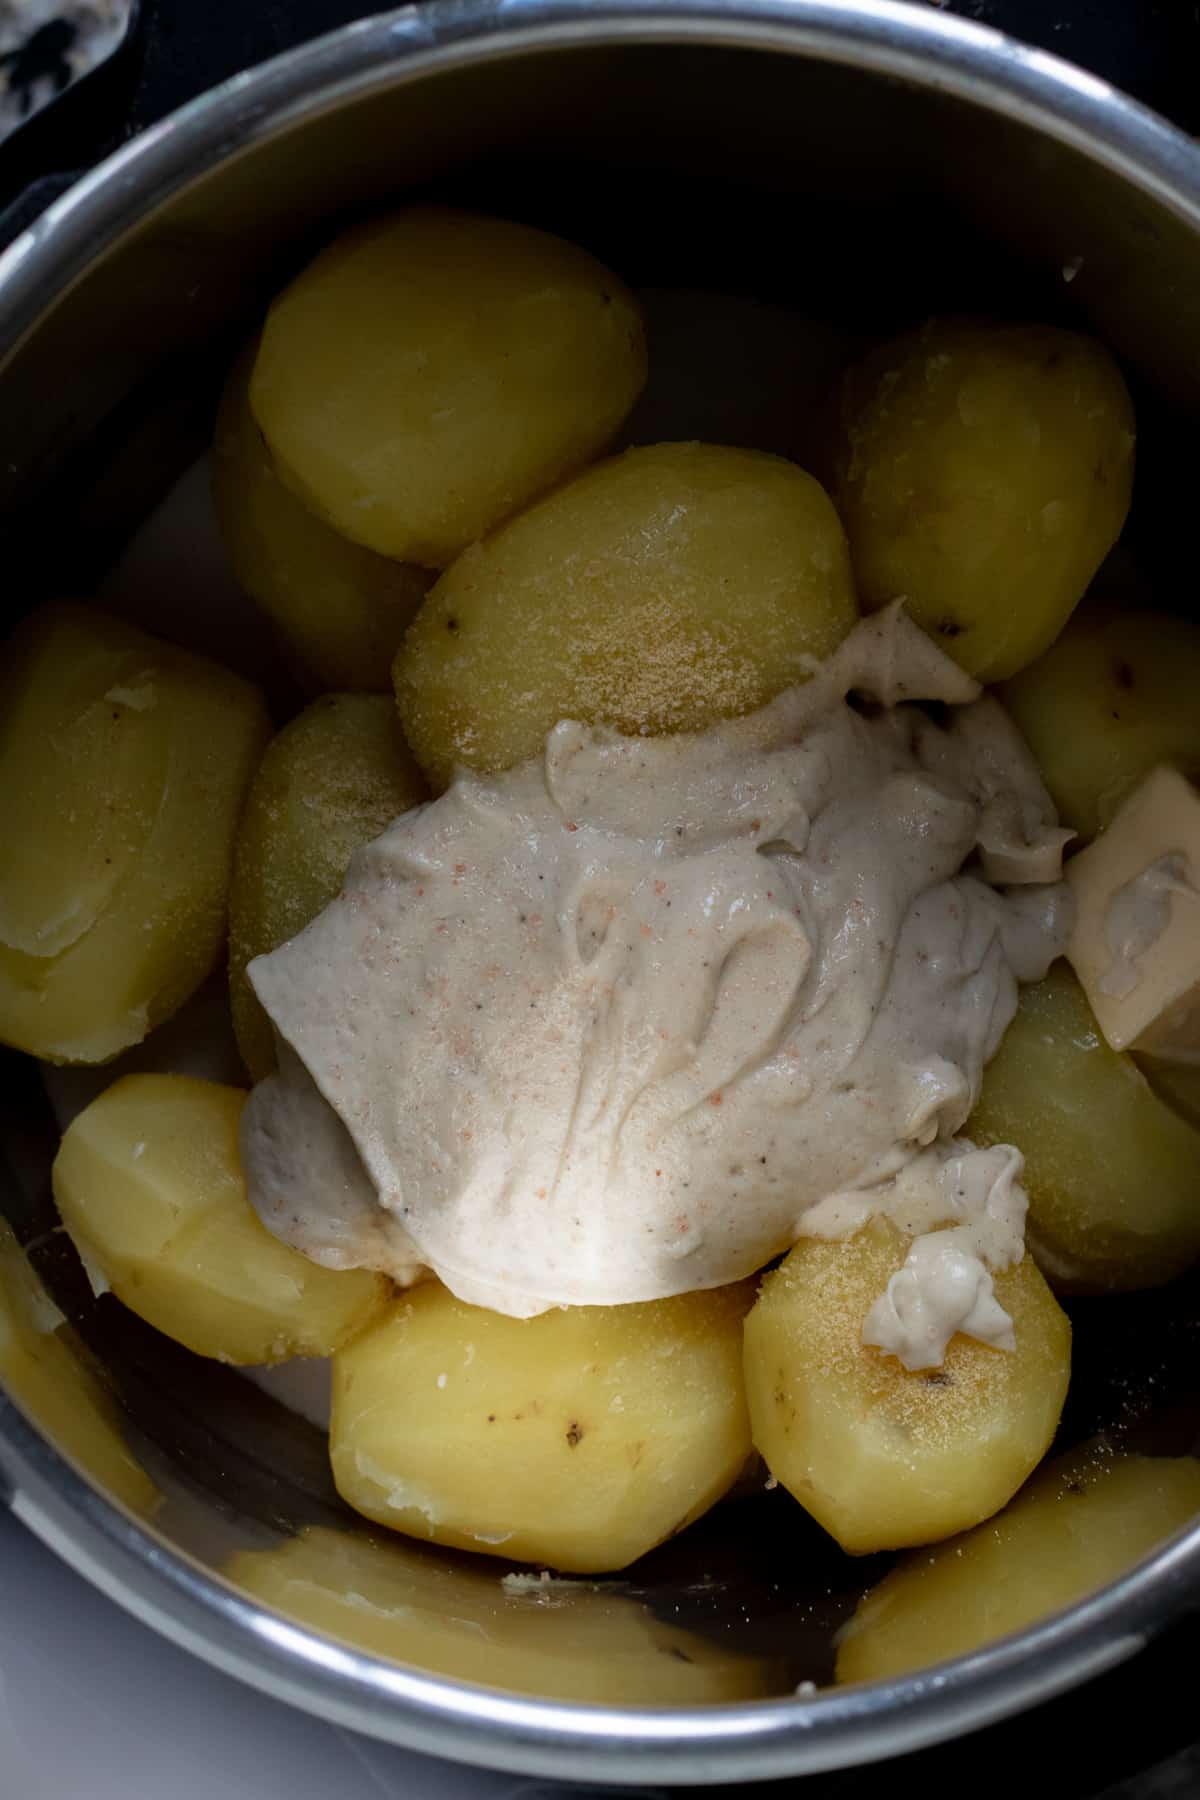 Cooked gold potatoes with mashed potato ingredients added on top.